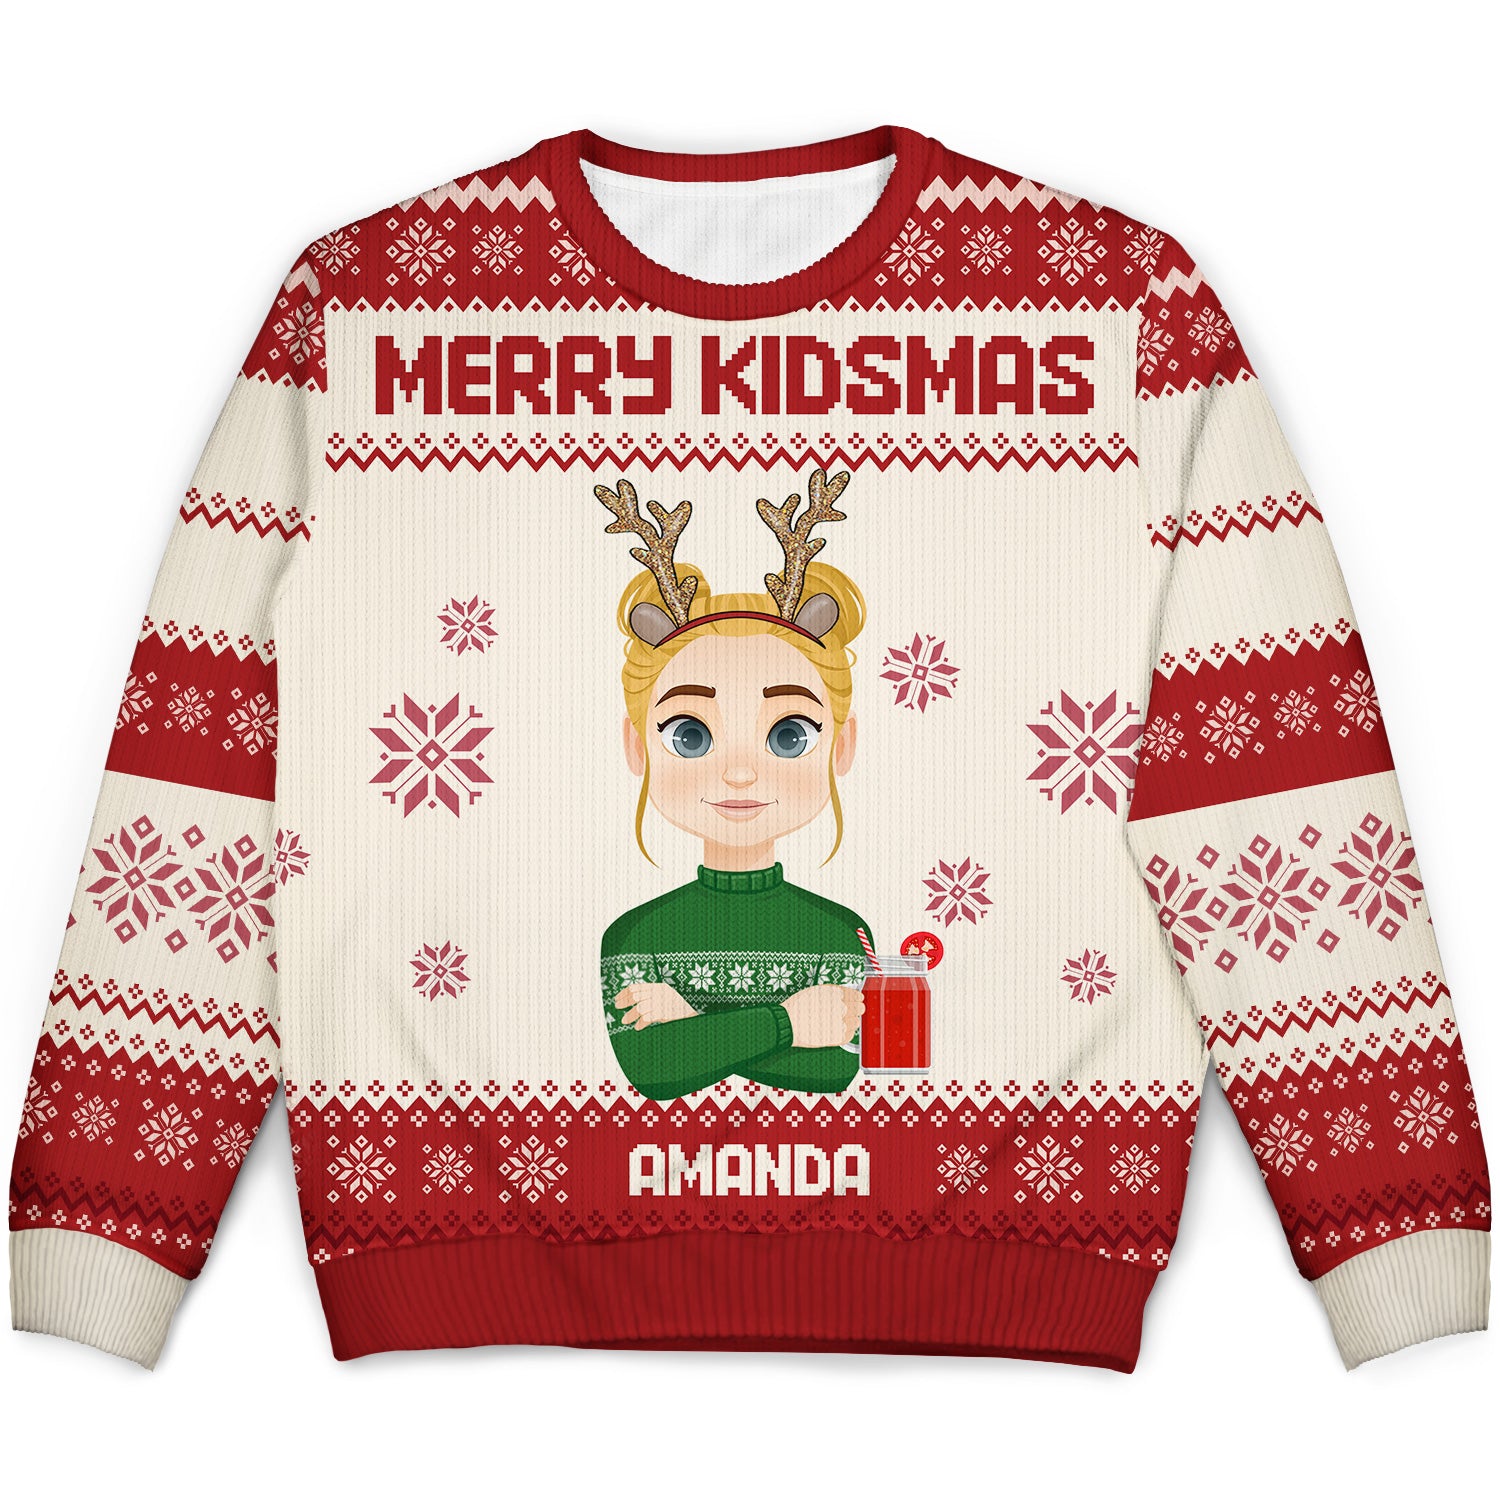 Merry Kidsmas - Christmas Gift For Kid Granddaughter - Personalized Kid Ugly Sweater